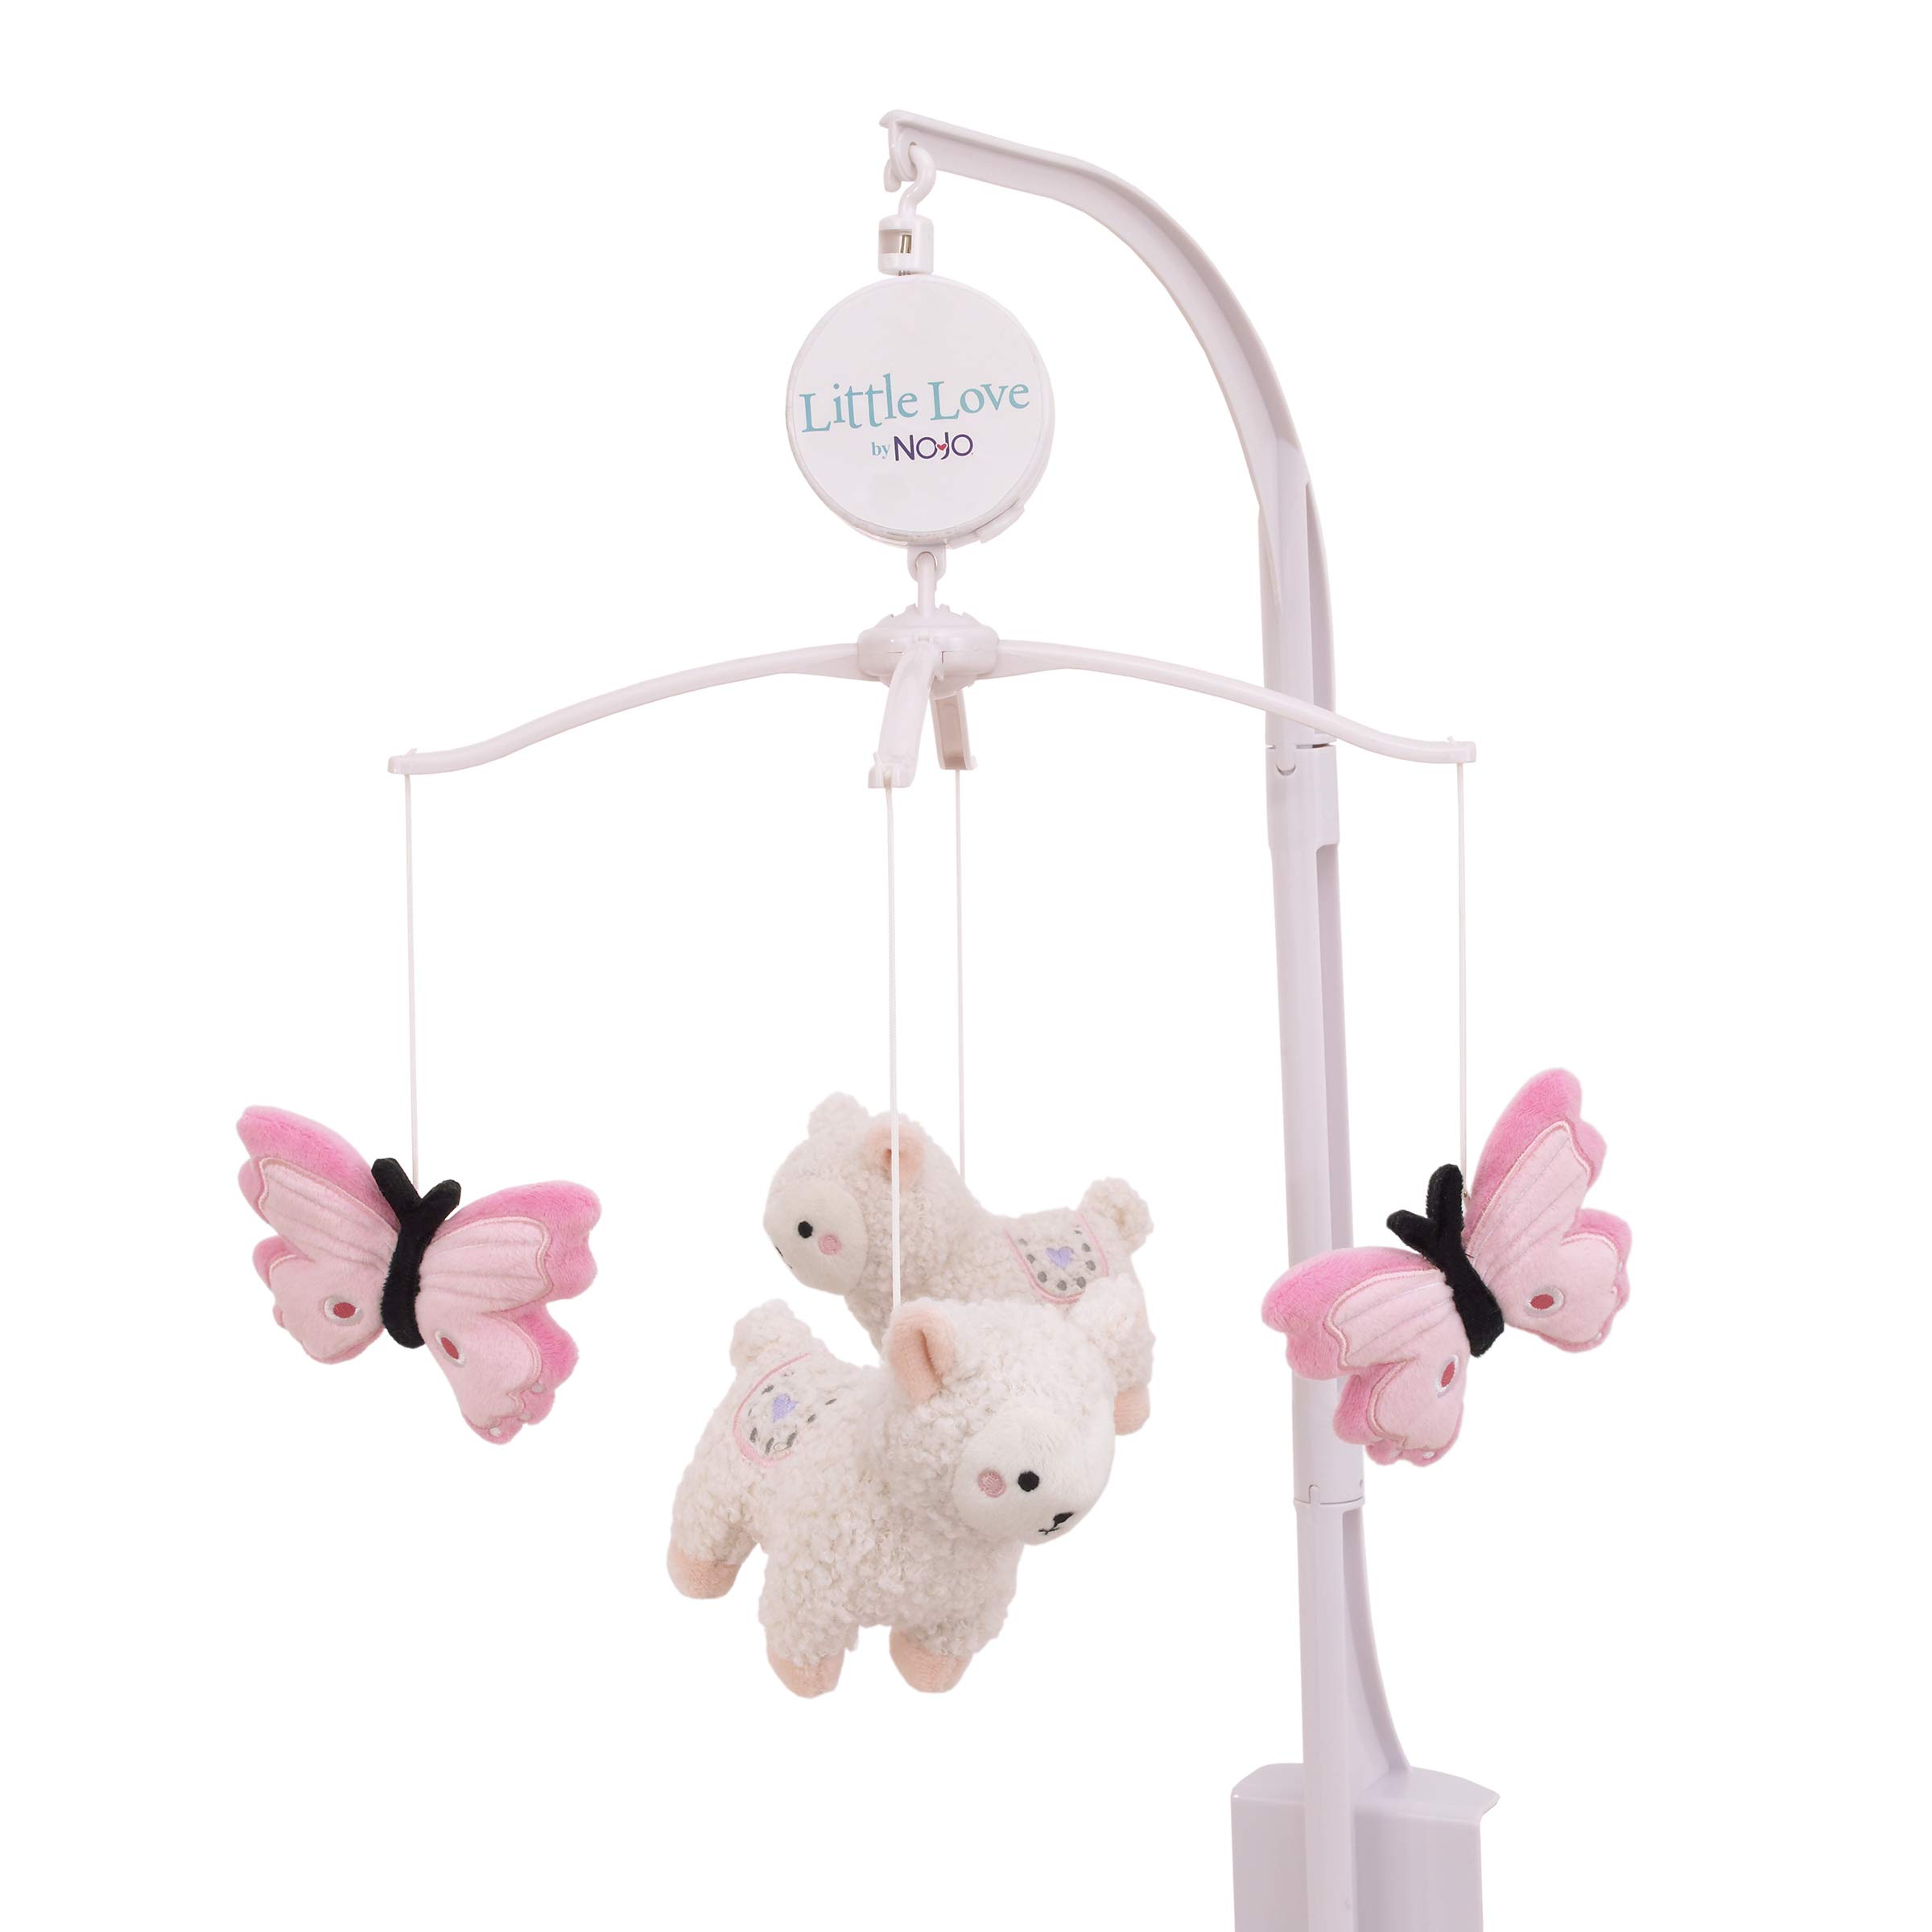 NoJo Little Love by NoJo Sweet Llama & Butterflies Pink & White Musical Mobile, Pink, Ivory, Lavender